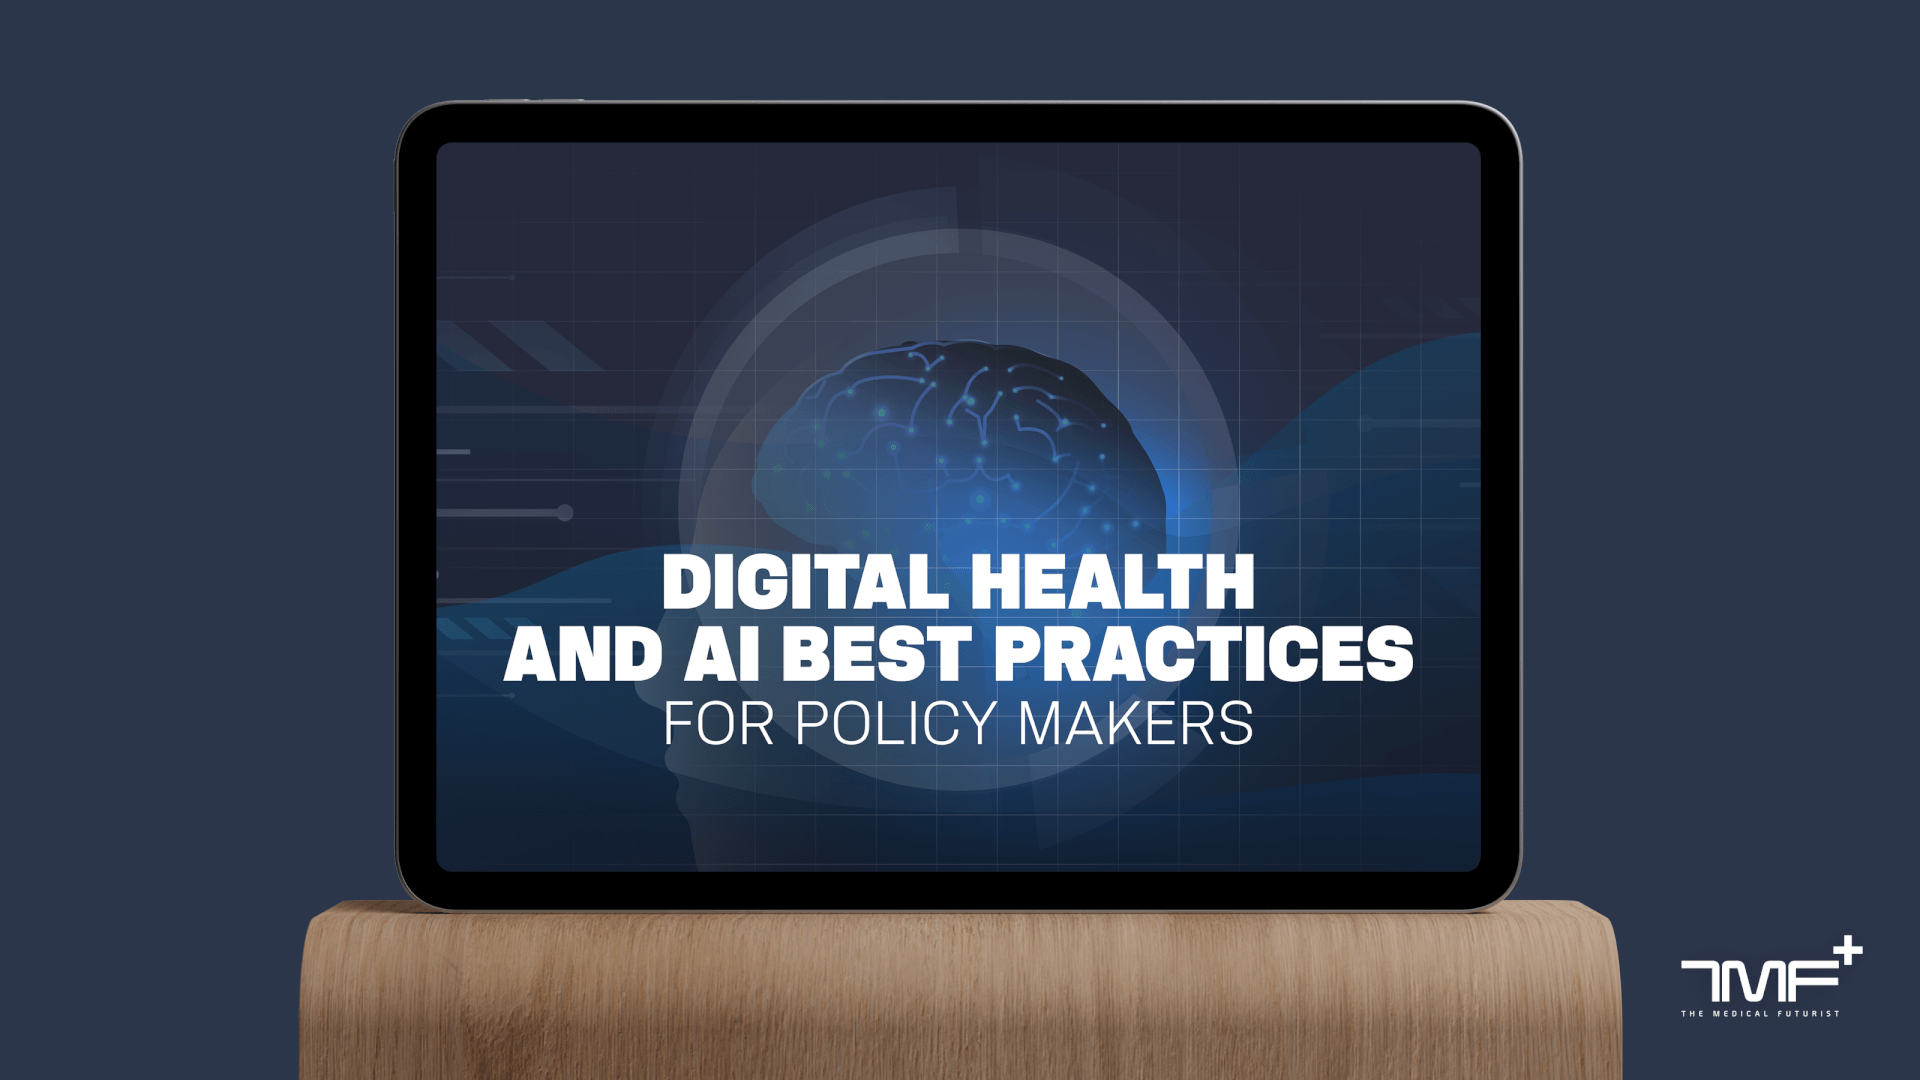 Digital Health And AI Best Practices For Policy Makers